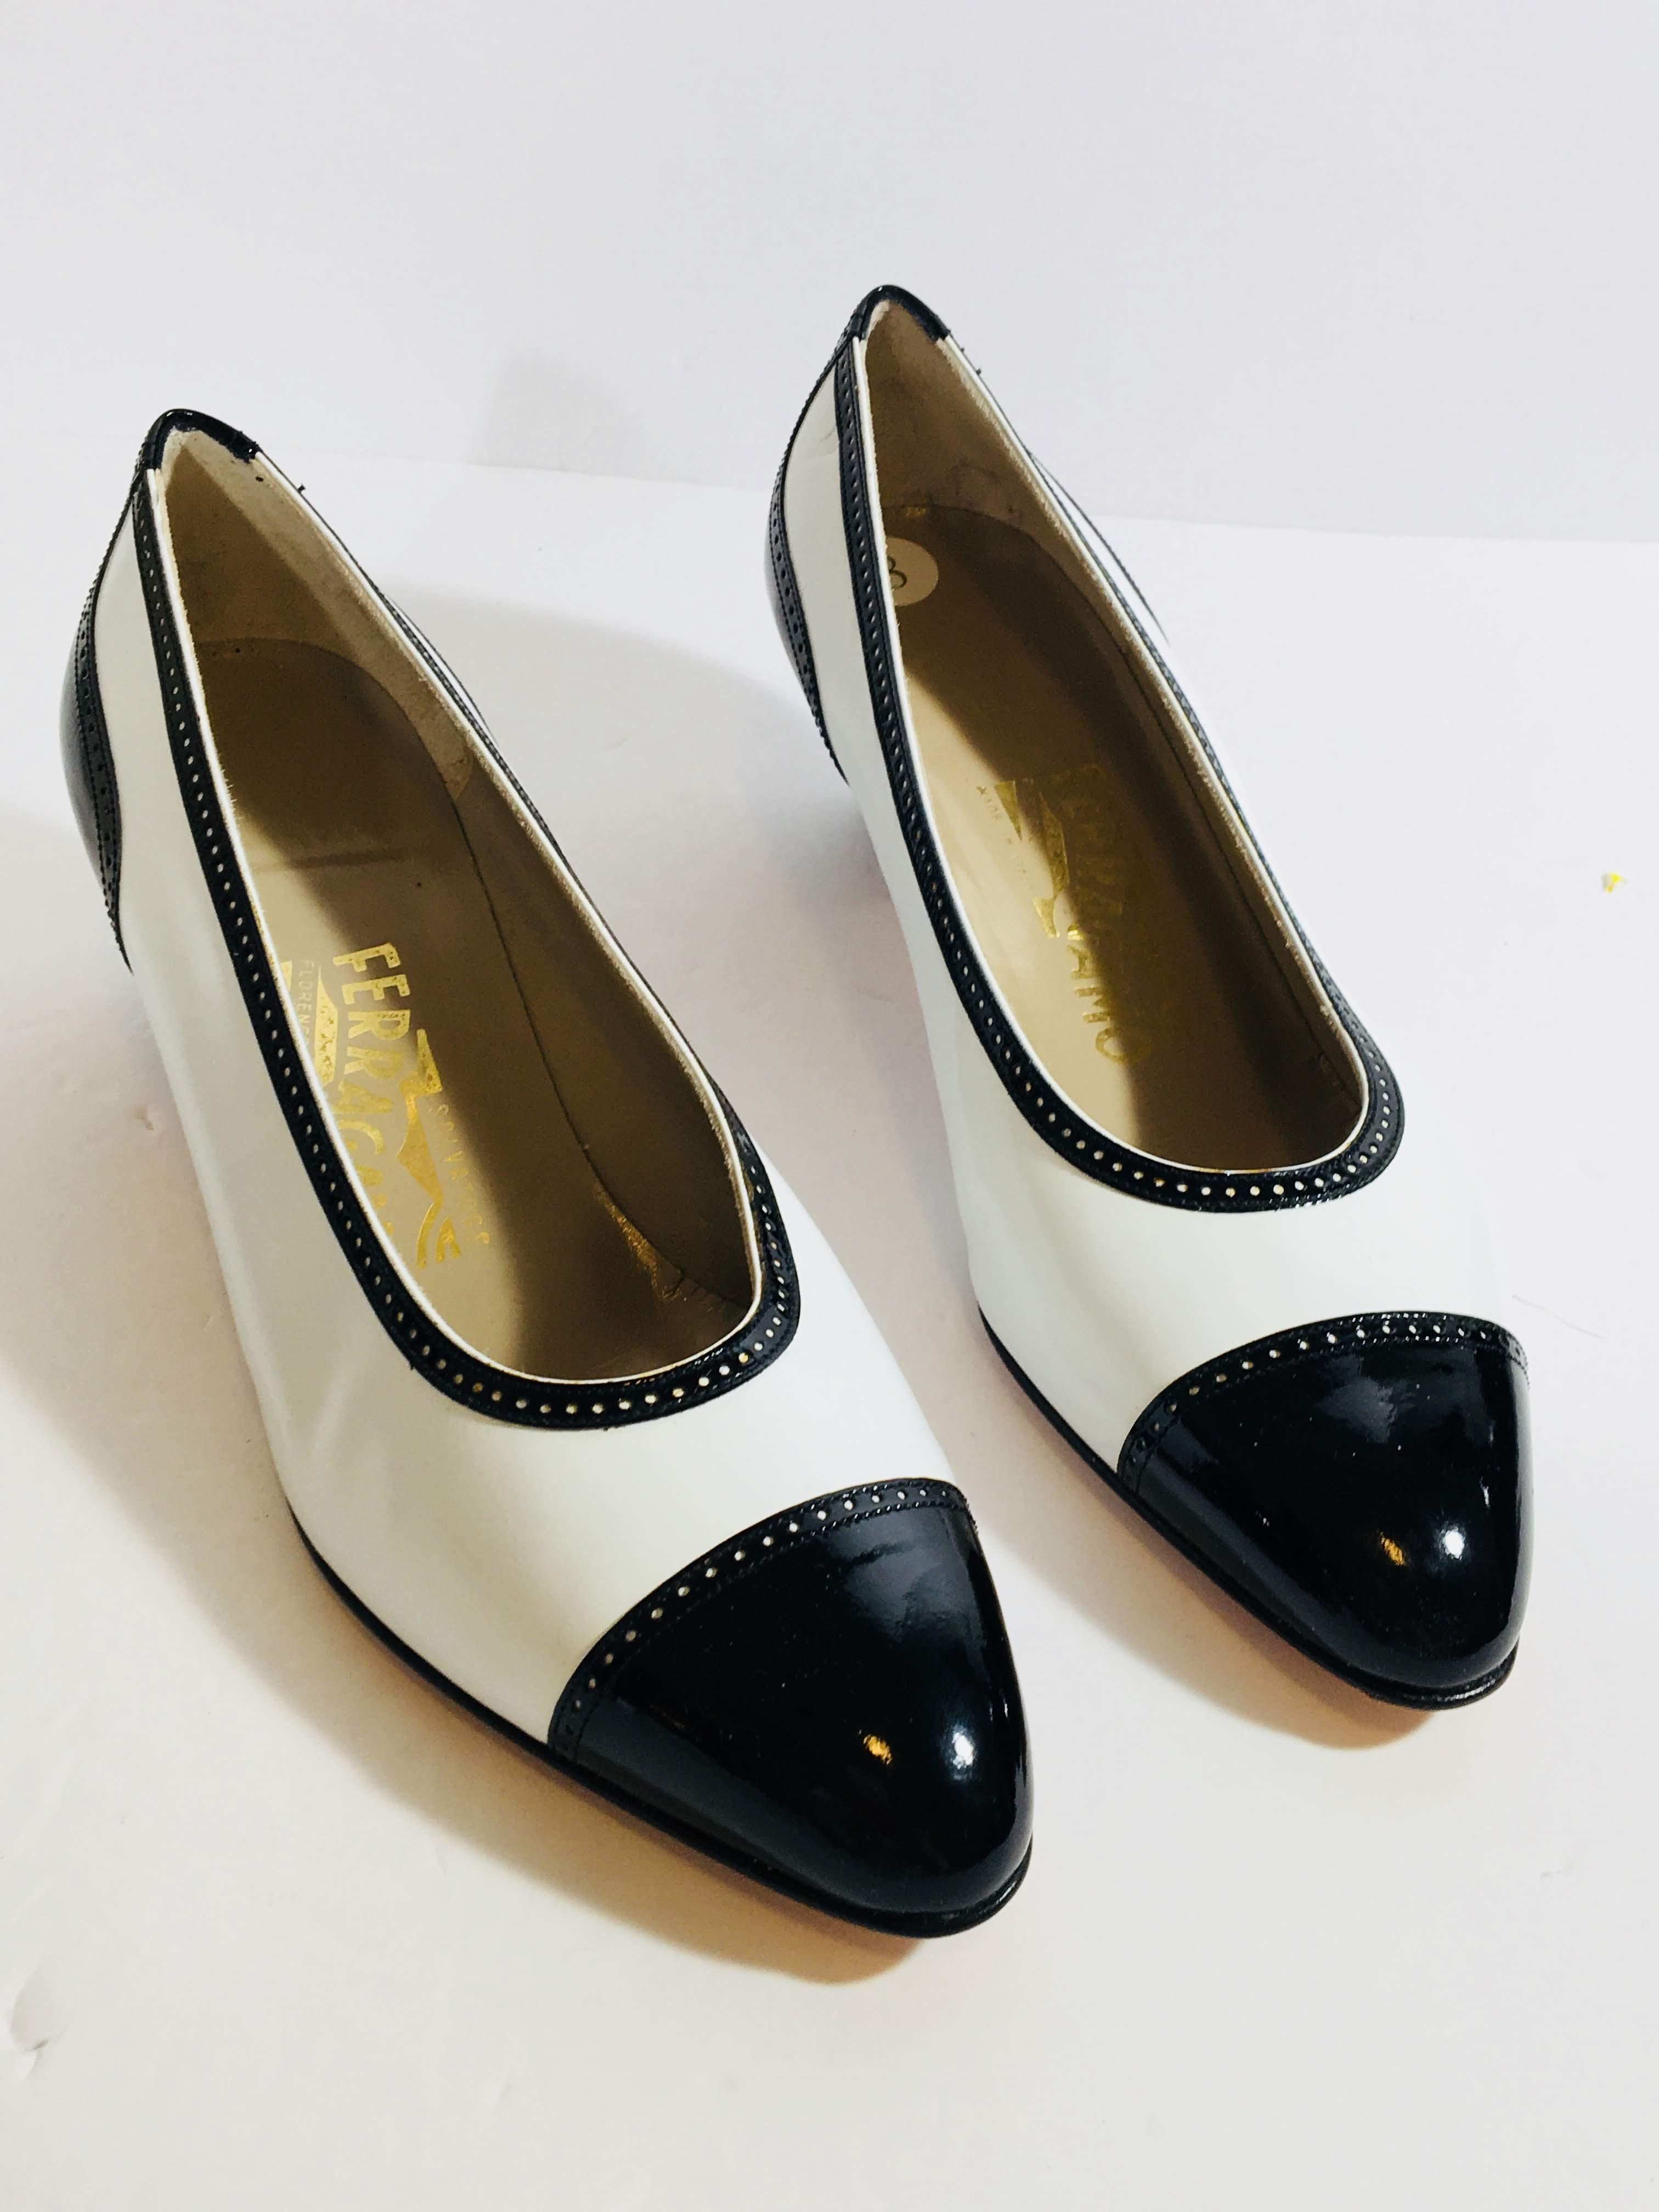 Salvatore Ferragamo Madison Pumps in Black and White Patent Leather with Round Toe and Small Block Heel.